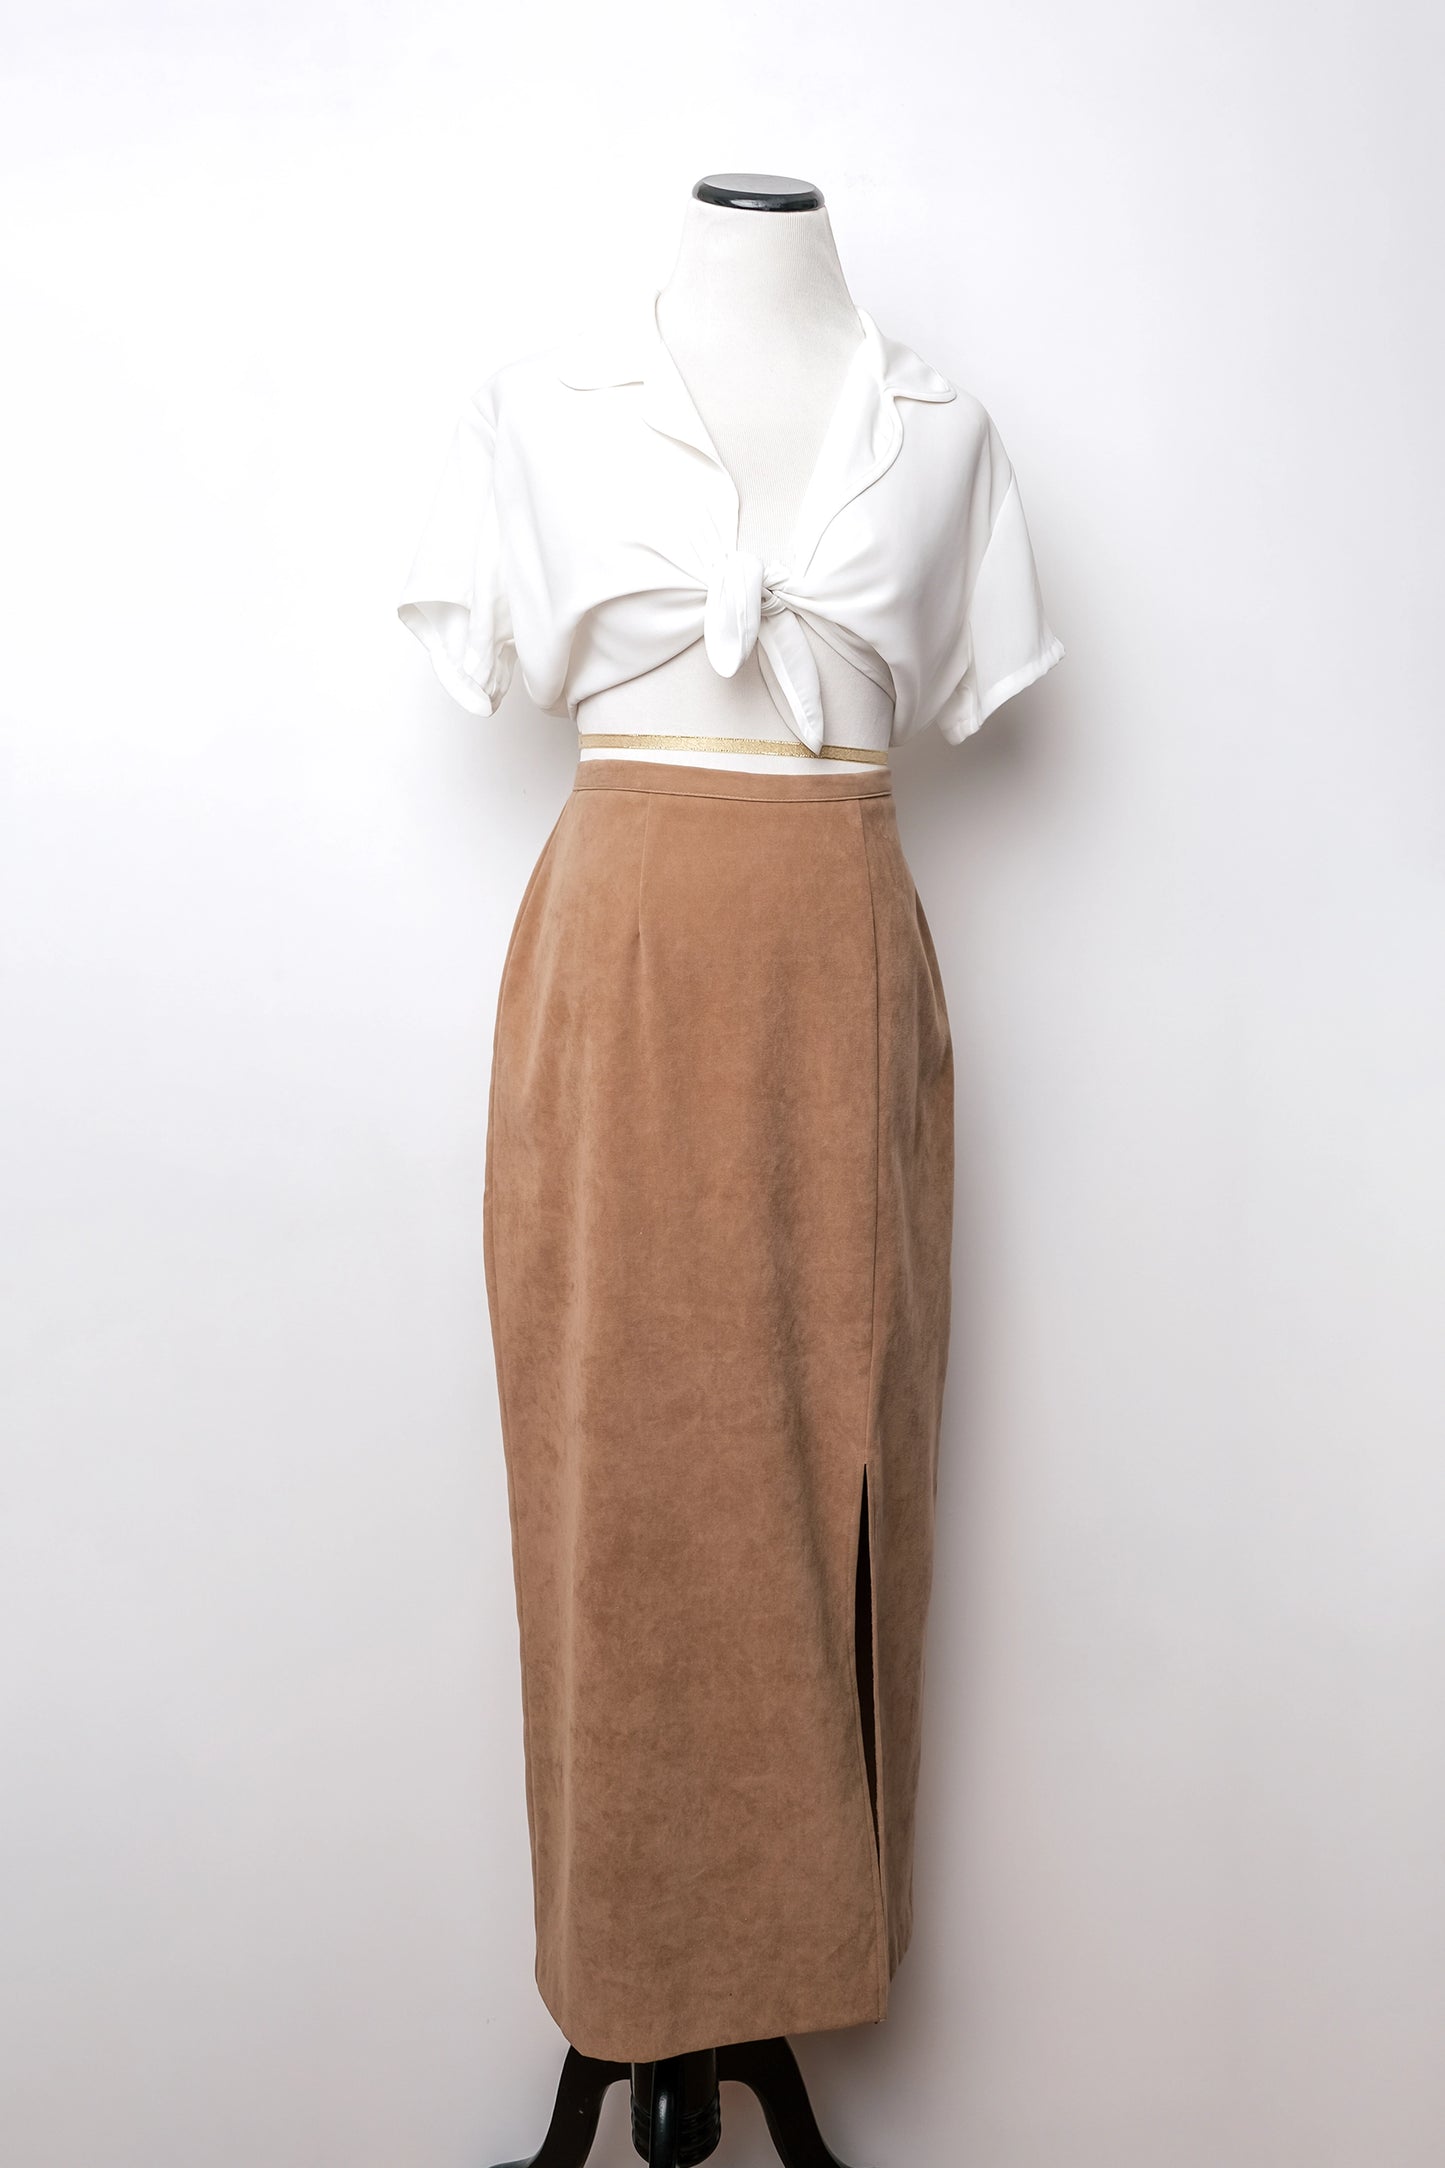 Faux Suede Tan High Waisted Midi Skirt US 8 M/L Y2K First Option Lightweight